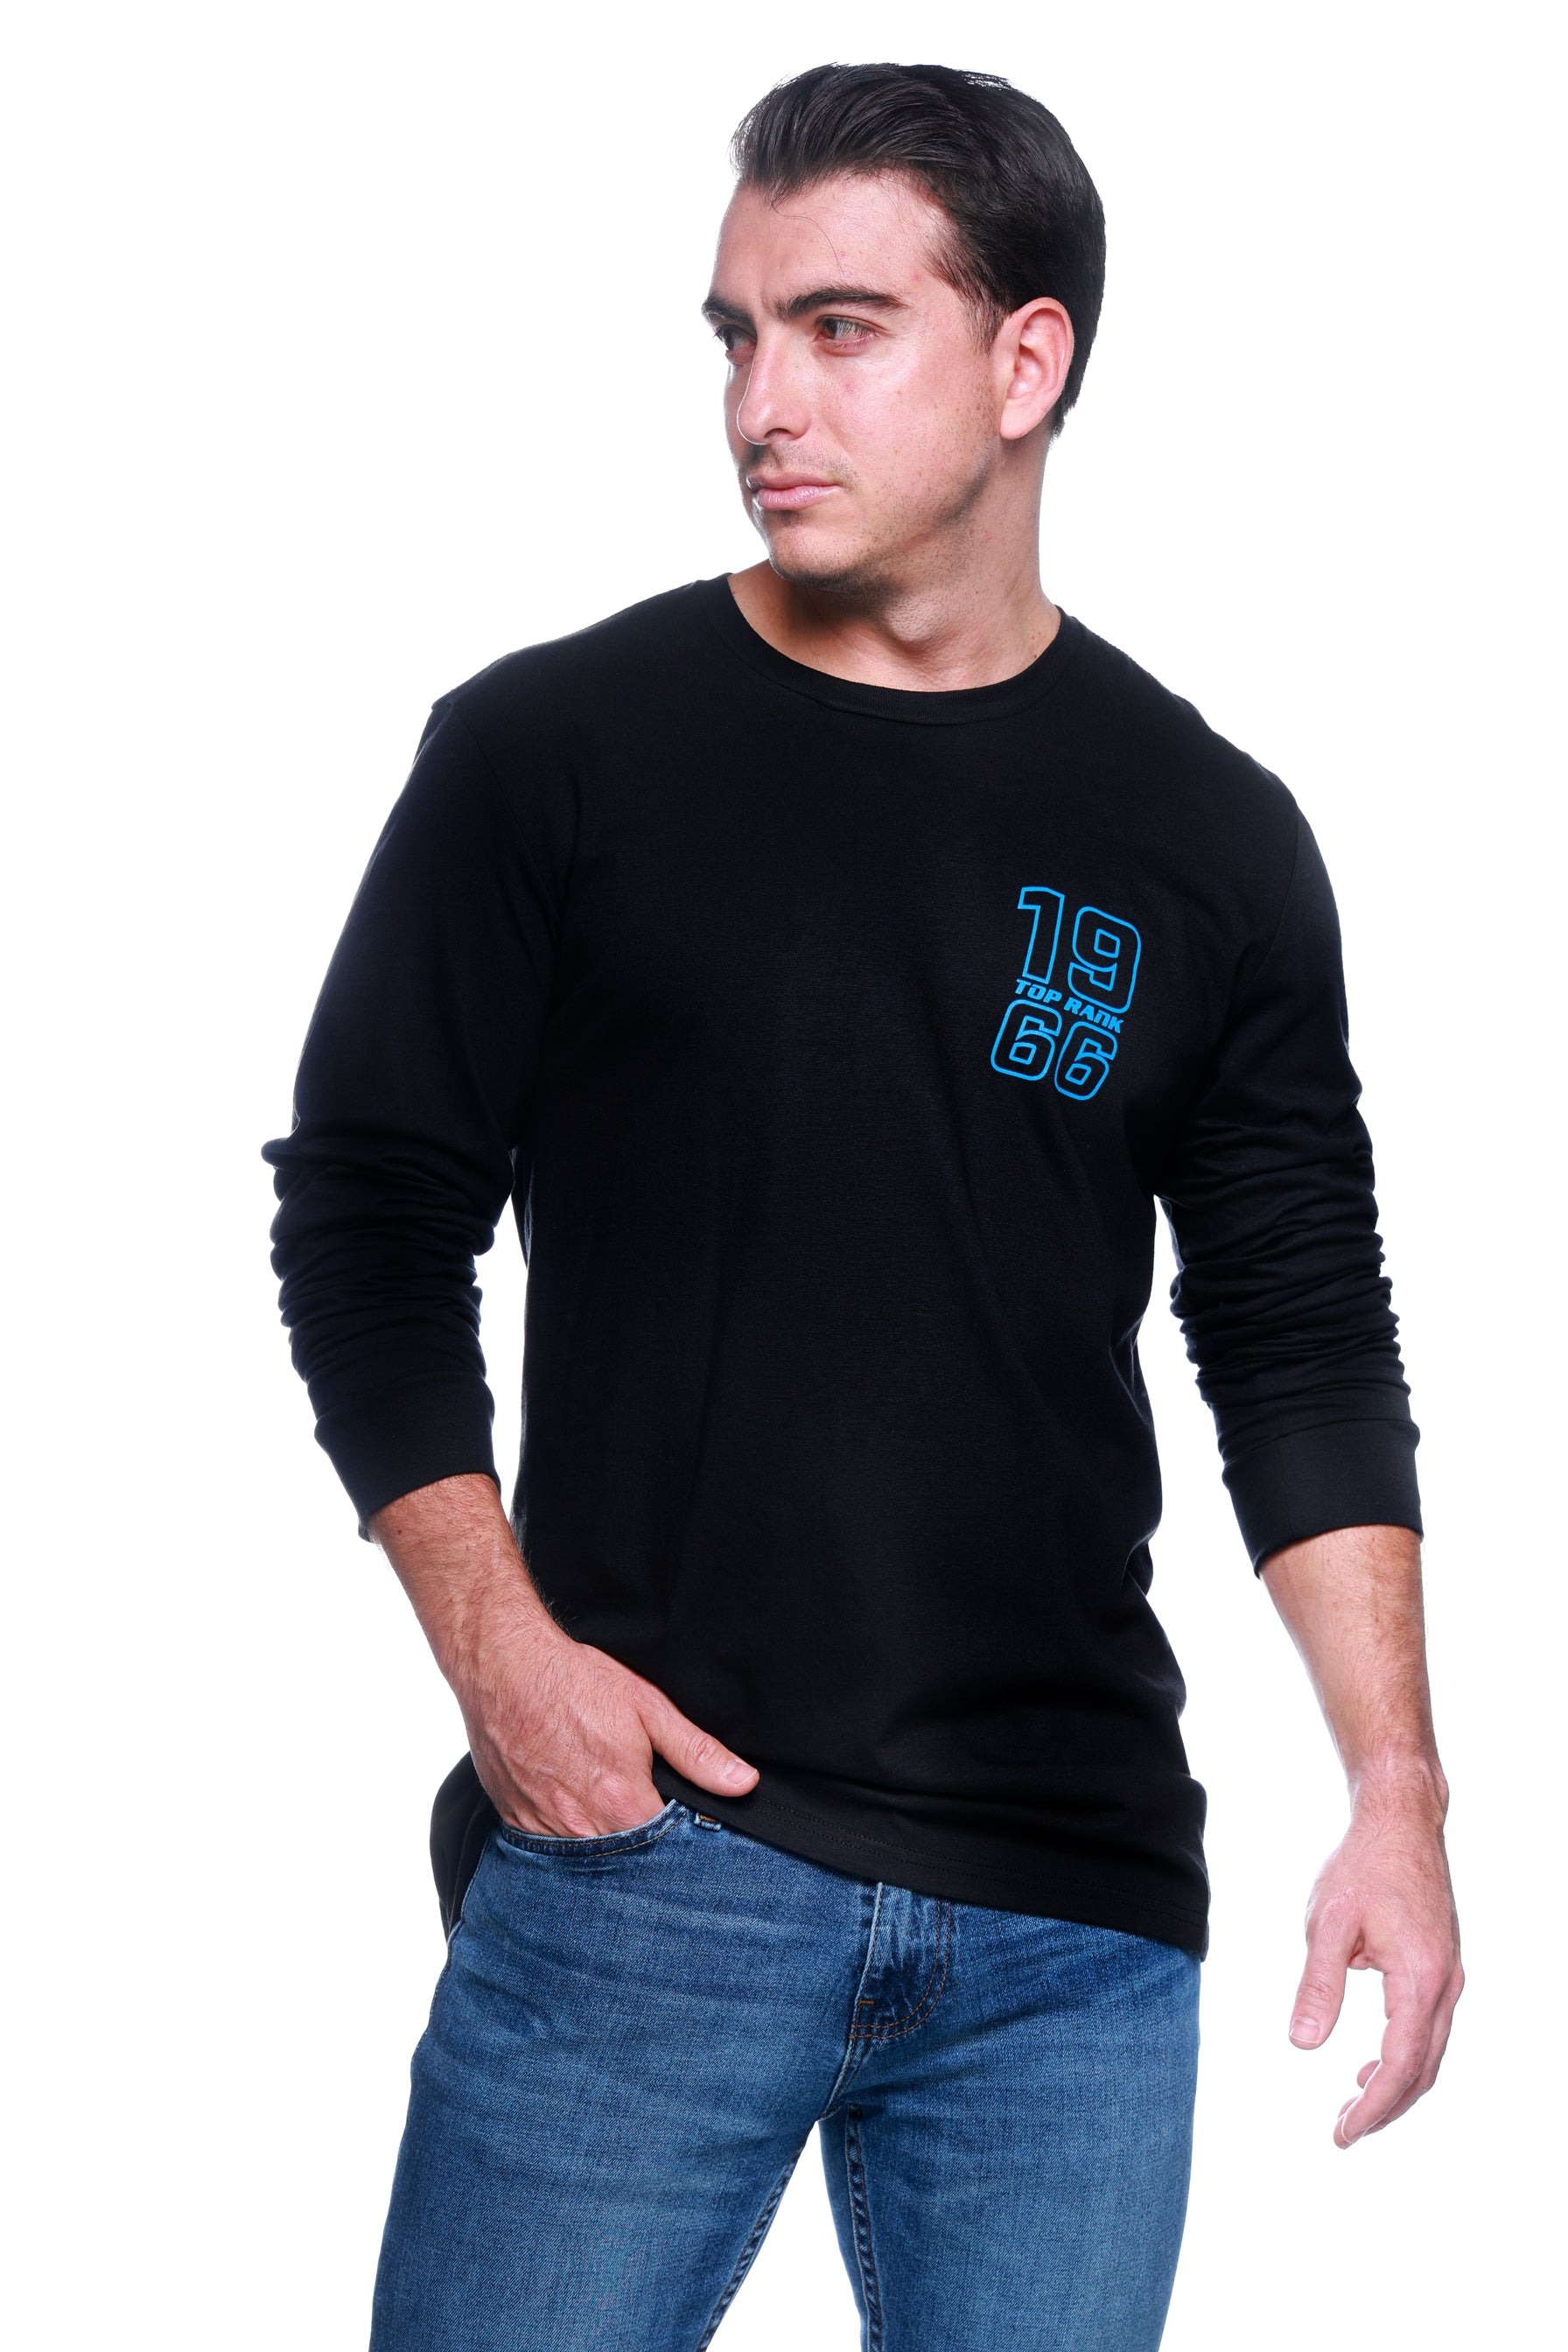 Top Rank Long Sleeve T-shirt featuring the TR logo on the left chest, worn by a male model.